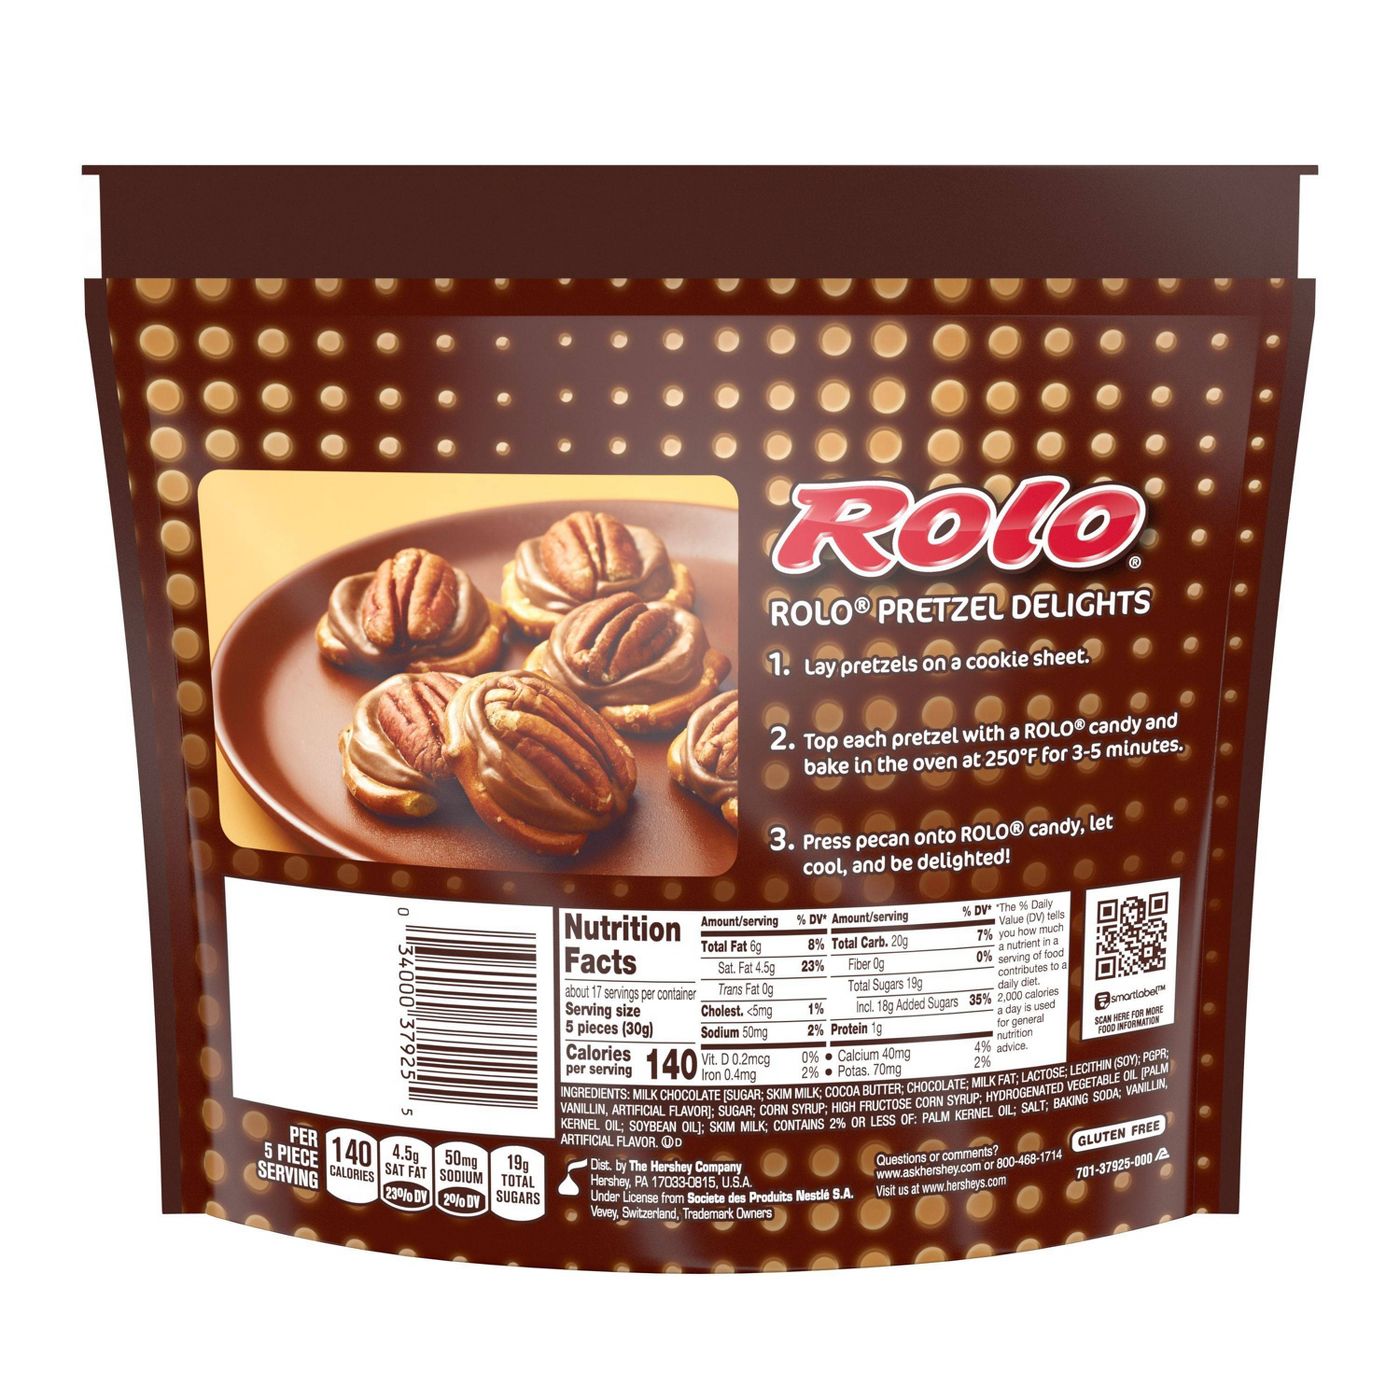 Rolo, Milk Chocolate and Caramel Candy, Family Size, 17.8oz